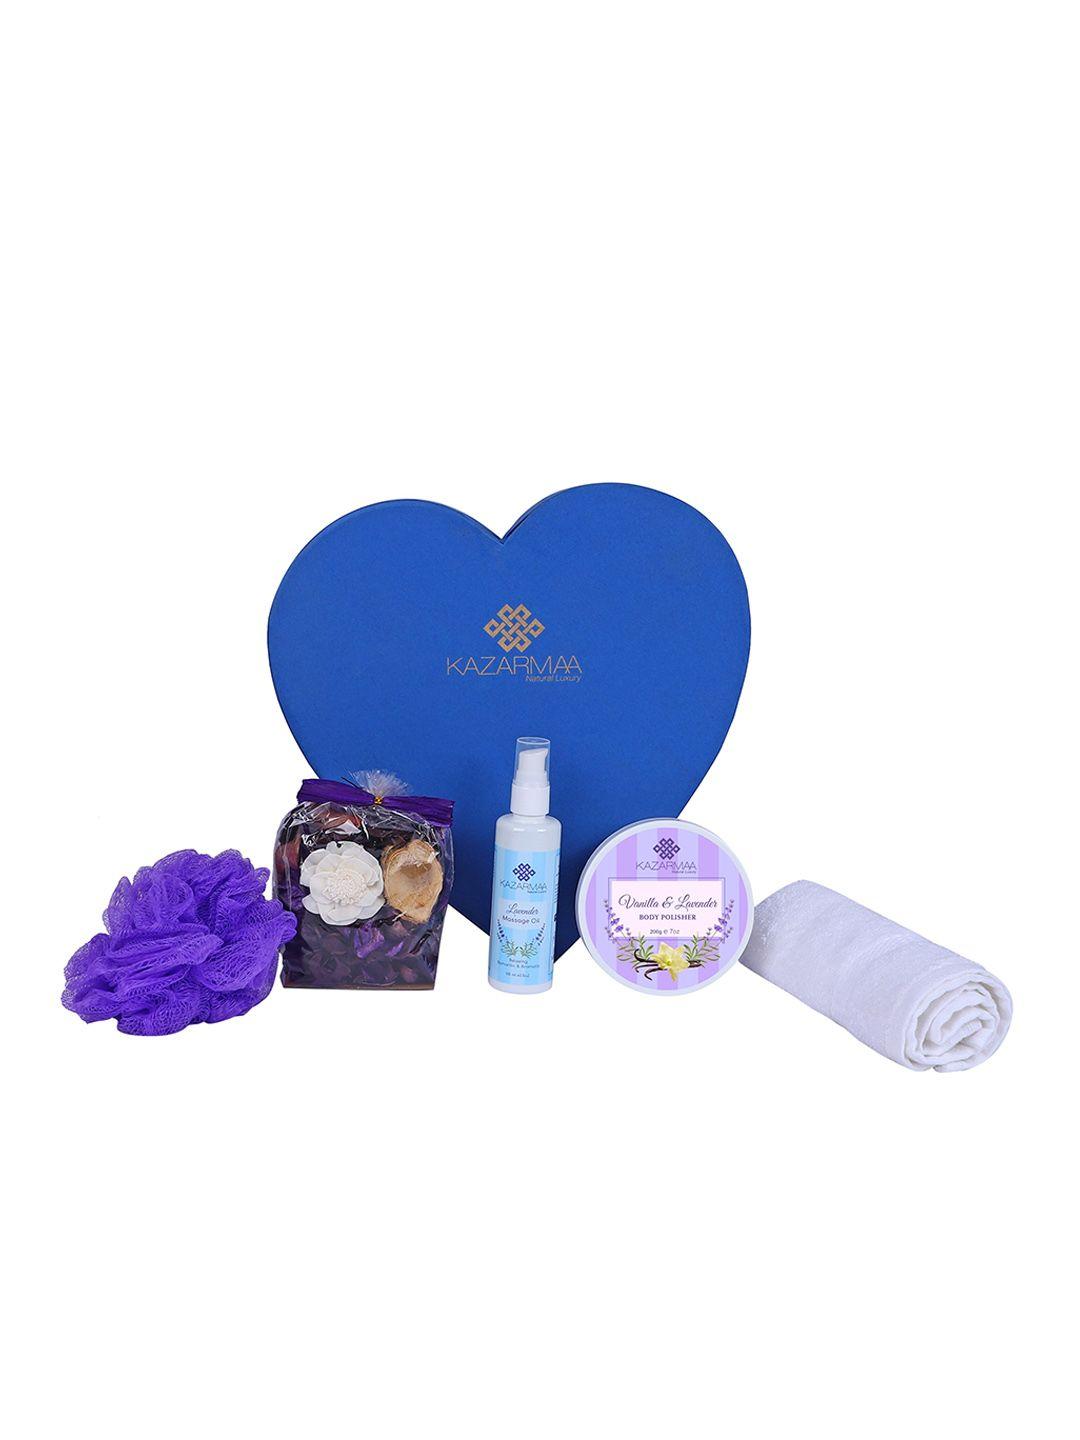 kazarmaa 5-pcs lavender love cleansing and relaxing gift set